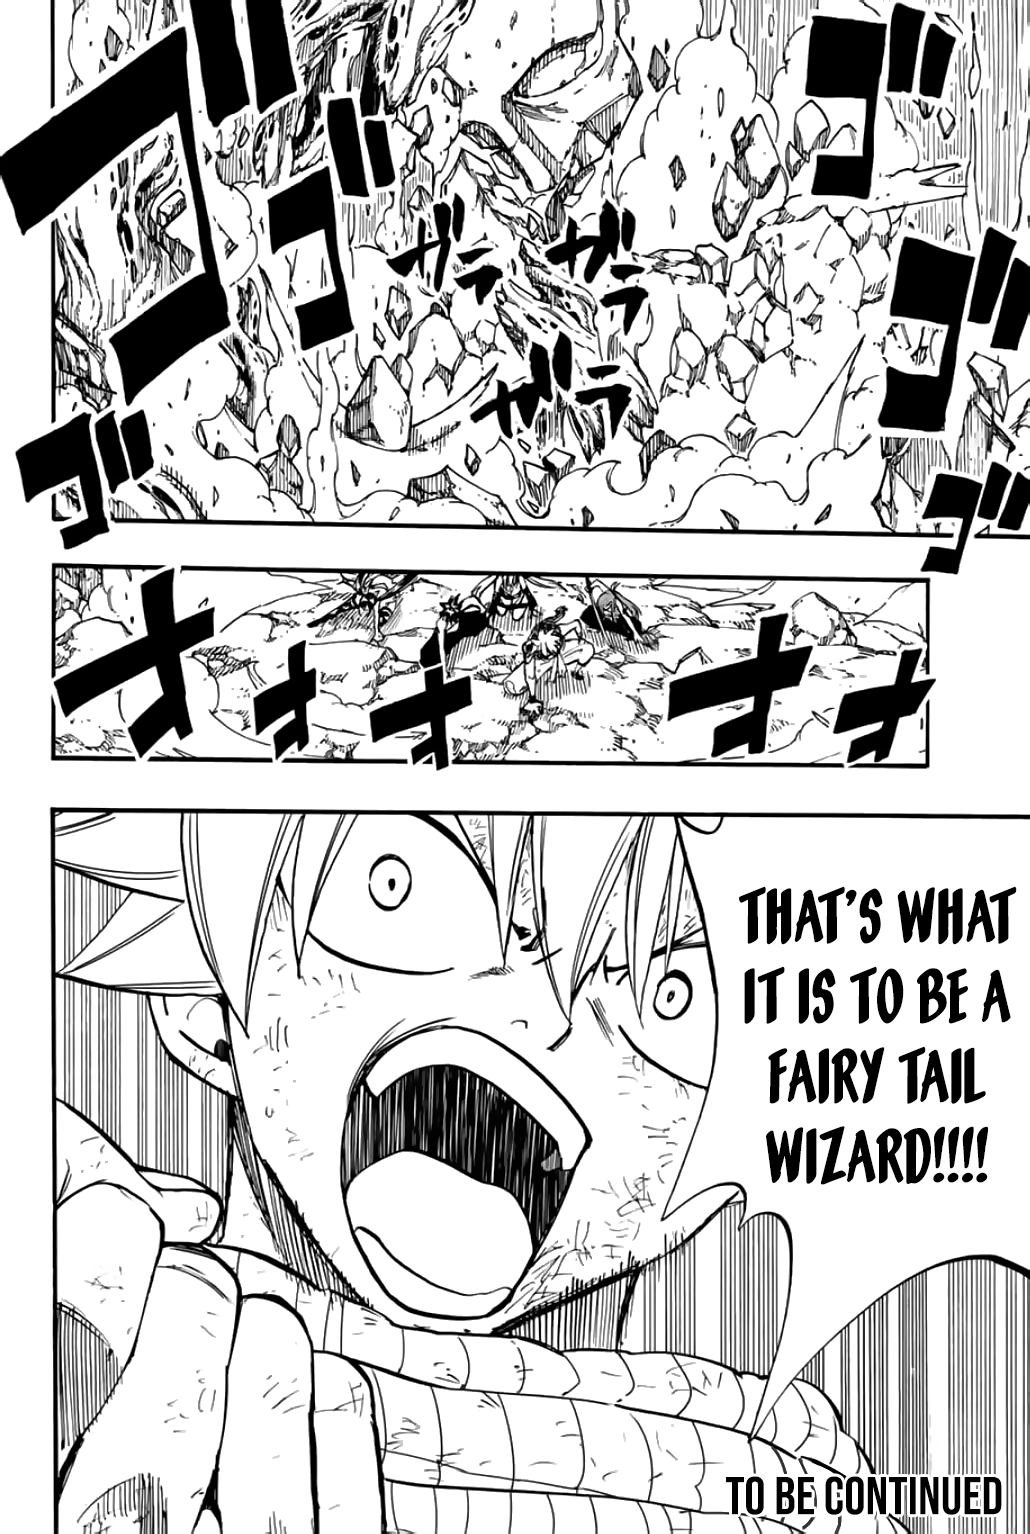 Fairy Tail: 100 Years Quest Chapter 88